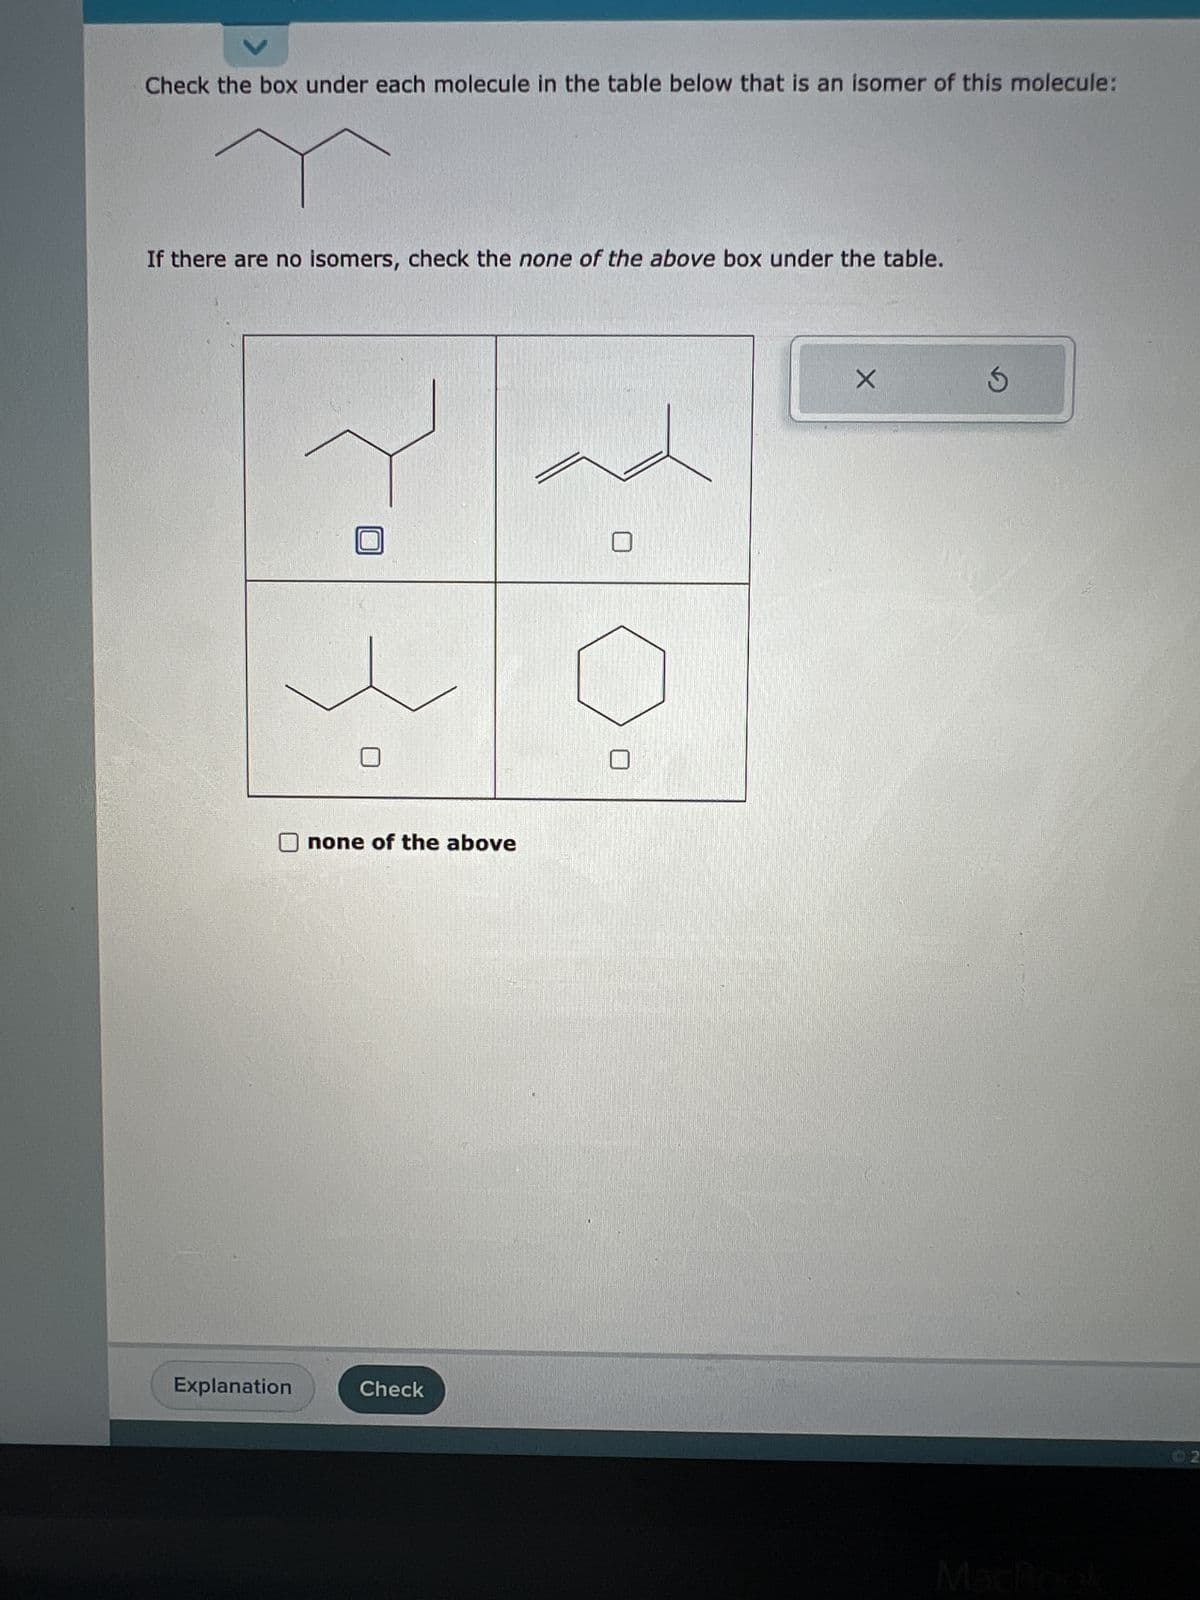 V
Check the box under each molecule in the table below that is an isomer of this molecule:
T
If there are no isomers, check the none of the above box under the table.
Explanation
none of the above
Check
X
S
02